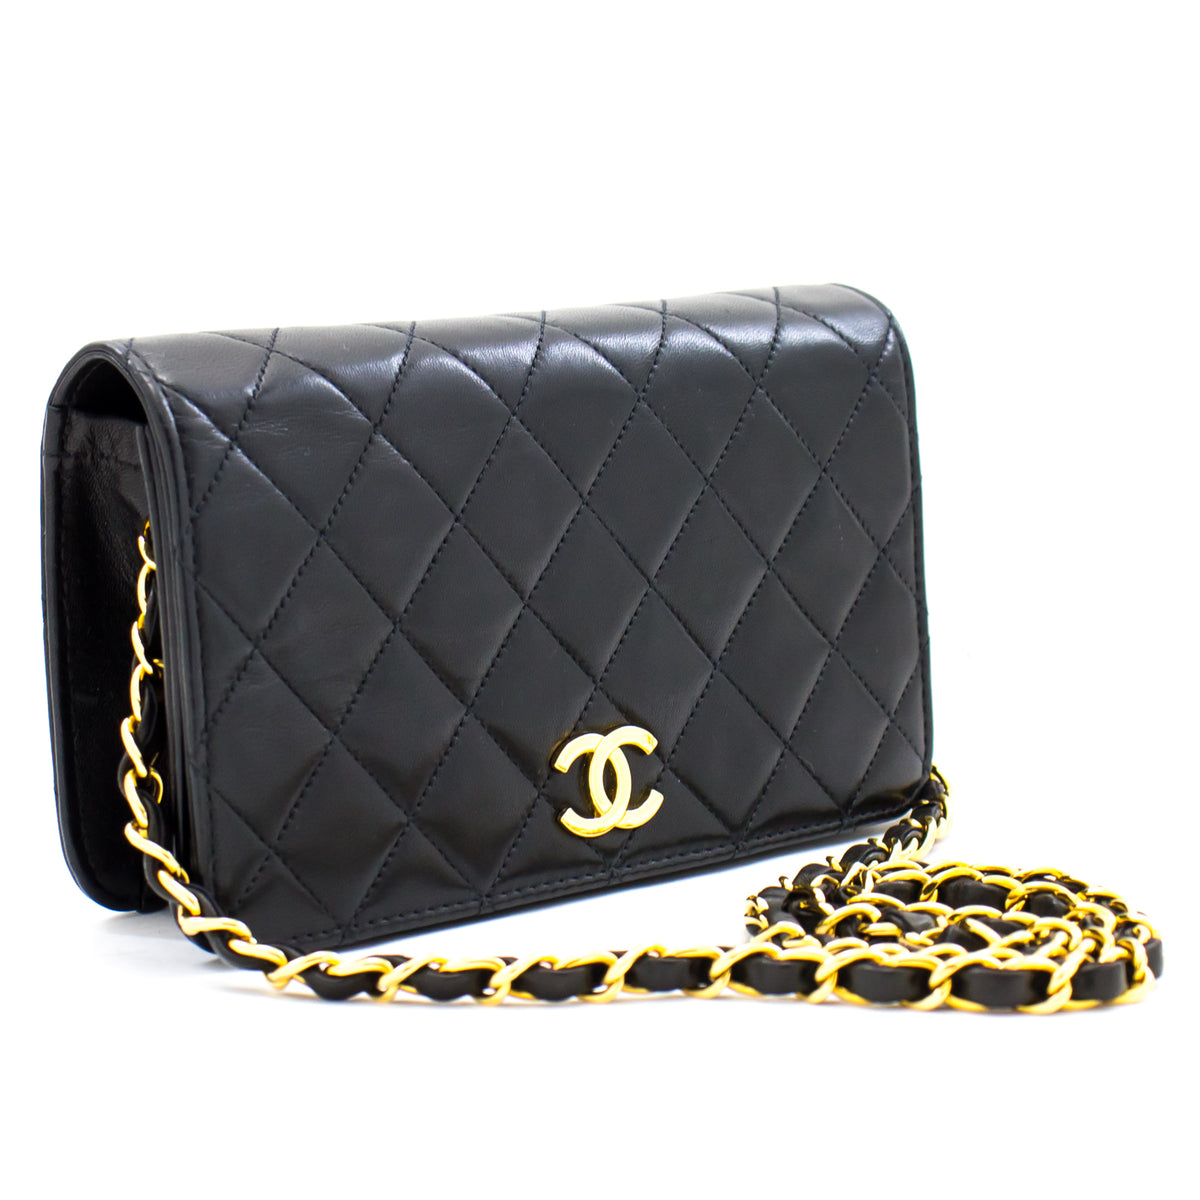 Chanel Black Quilted Lambskin Mini Flap Bag Chanel